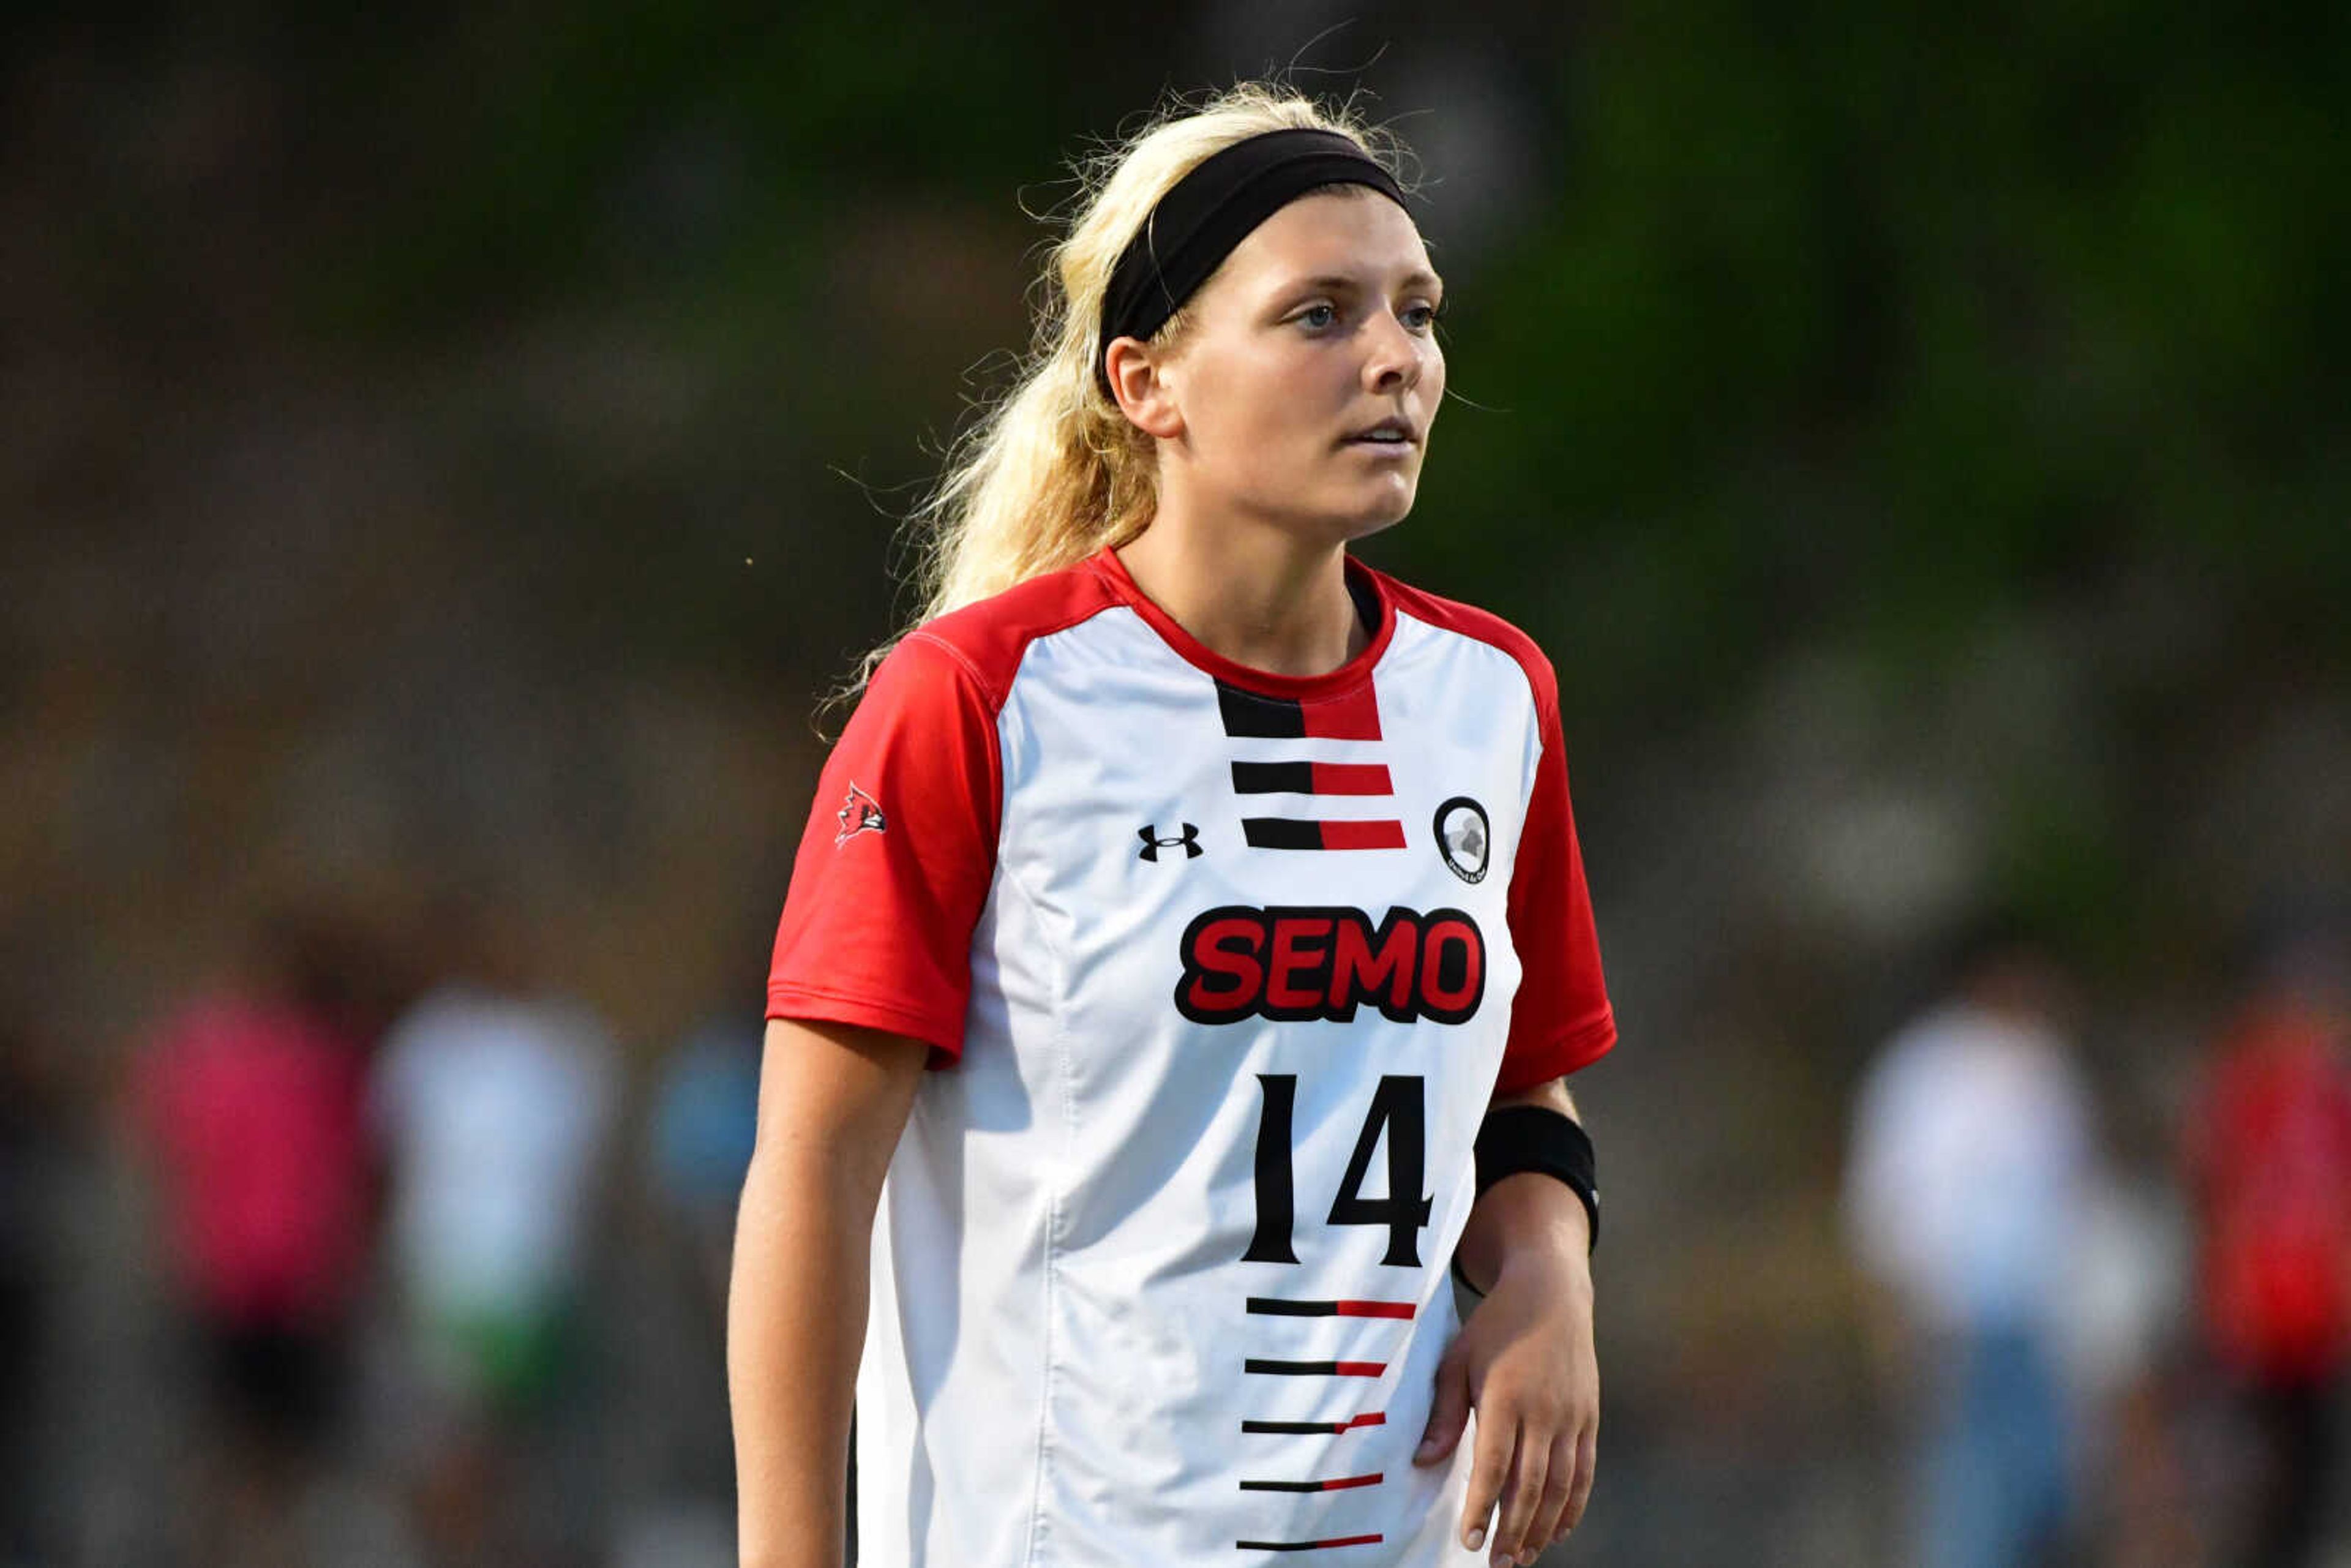 Redhawks redshirt junior Megan Heisserer stands on the field during a soccer game. Heisserer was named to the OVC Commissioner's honor roll for the 2020-21 academic year.